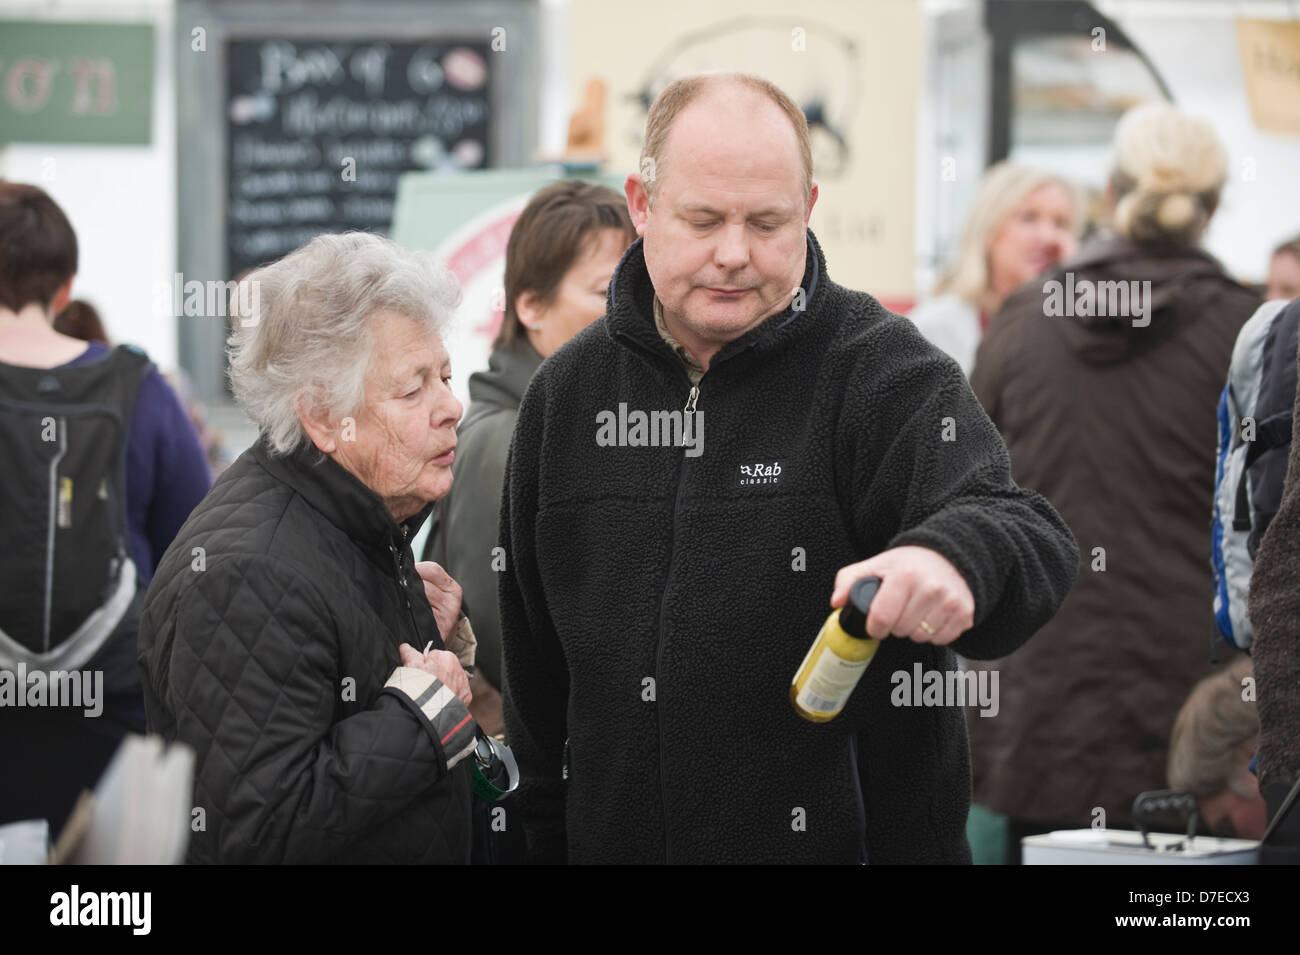 Visitors browsing stalls at Exeter Festival of South West Food & Drink Stock Photo